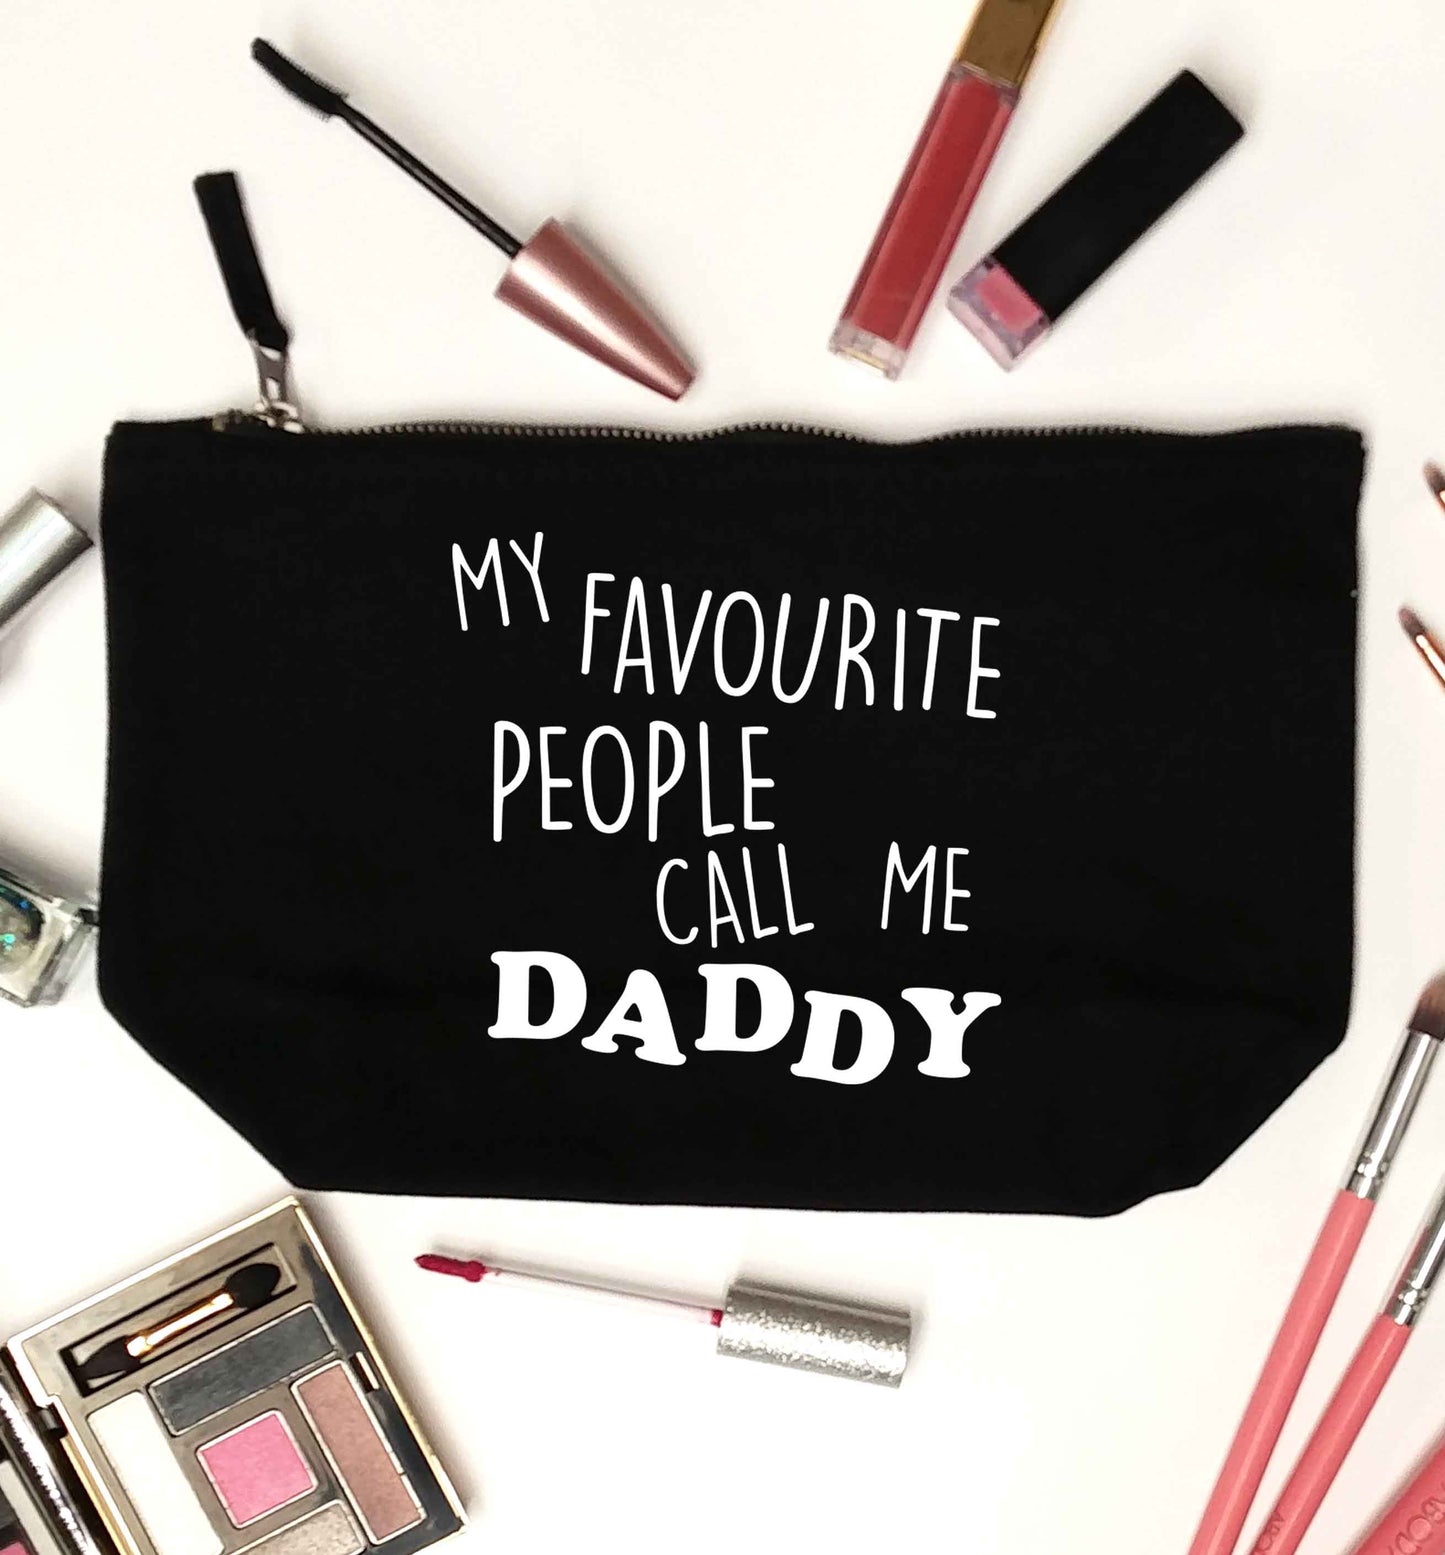 My favourite people call me daddy black makeup bag